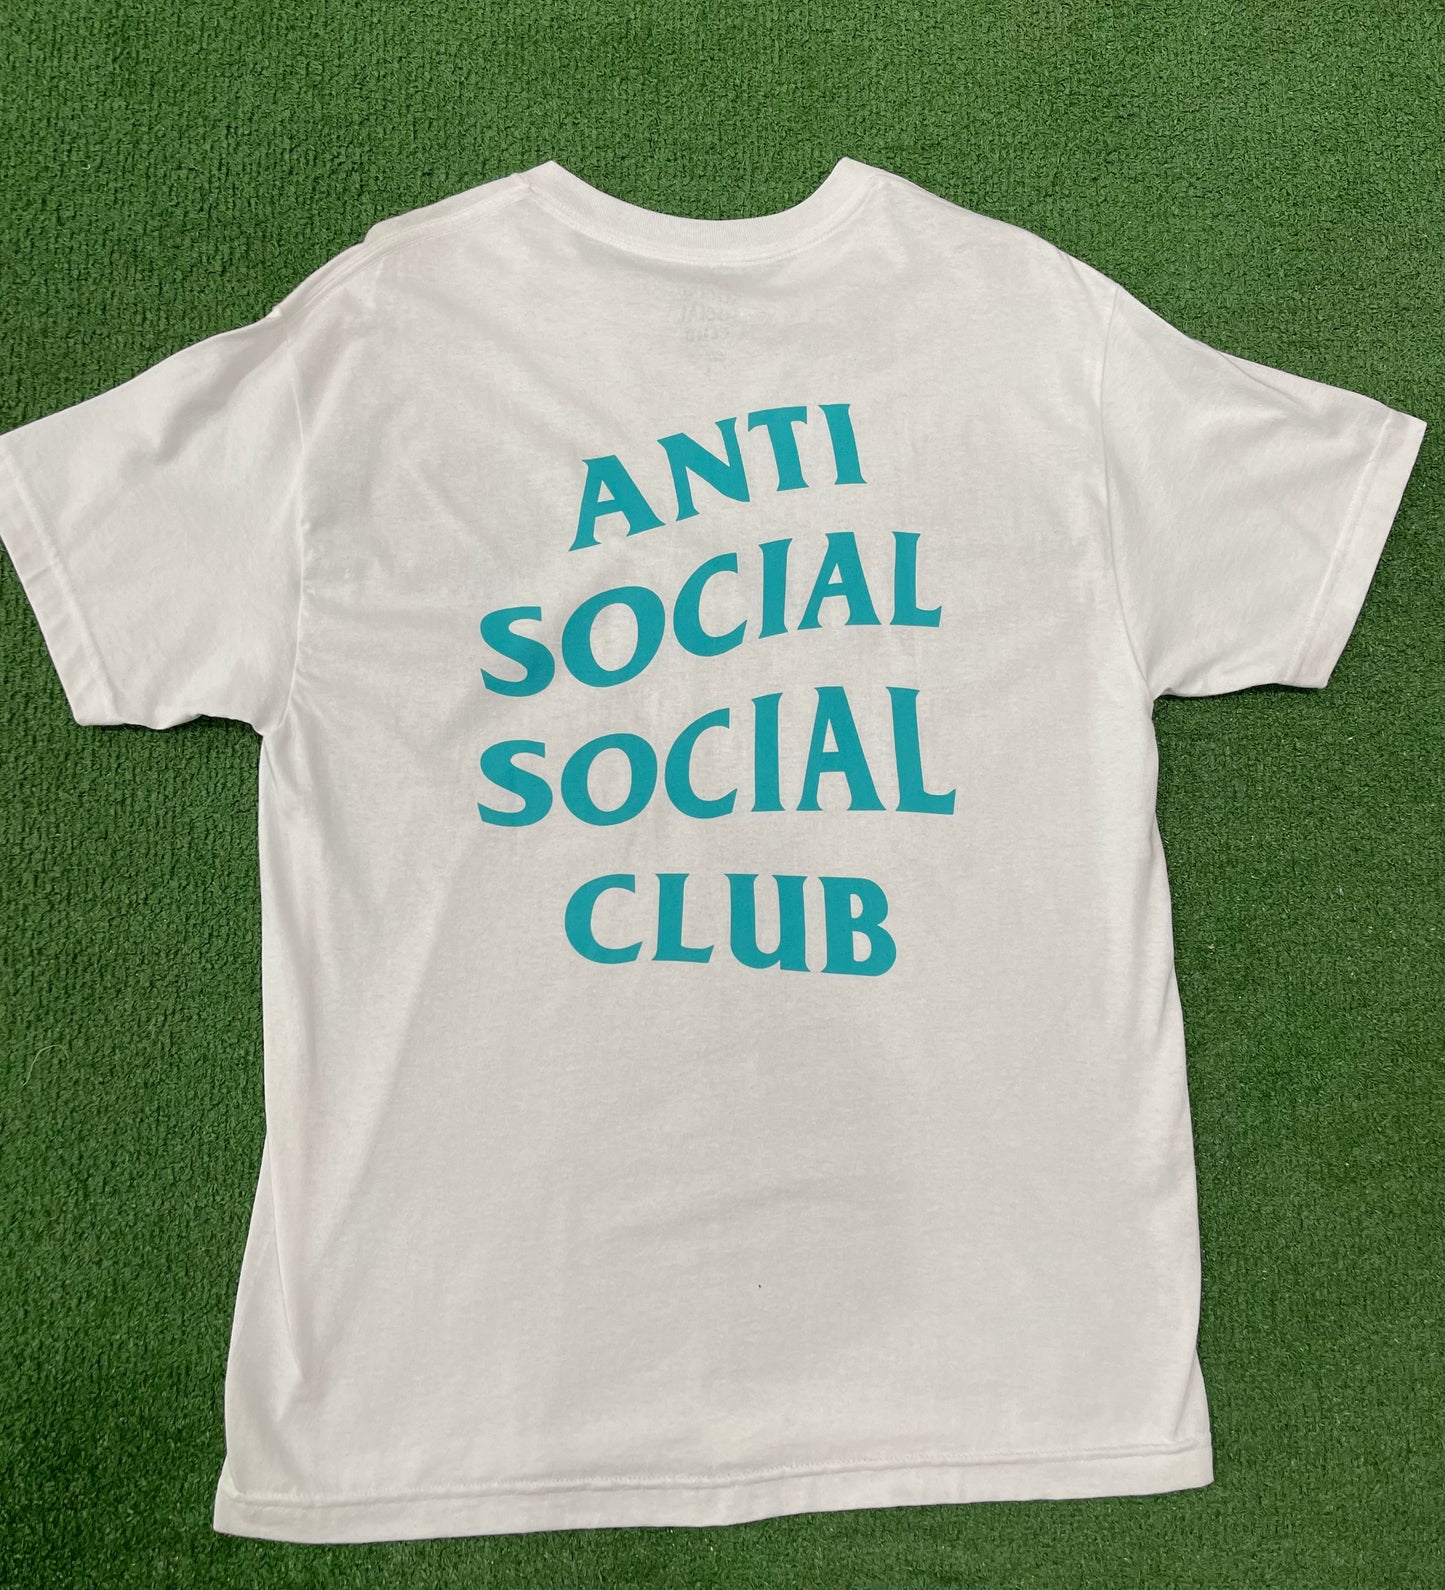 Boots à Lacet Daix Gris Logo Tee White / Teal, T-Shirt - Sneakersbe Sneakers Sale Online